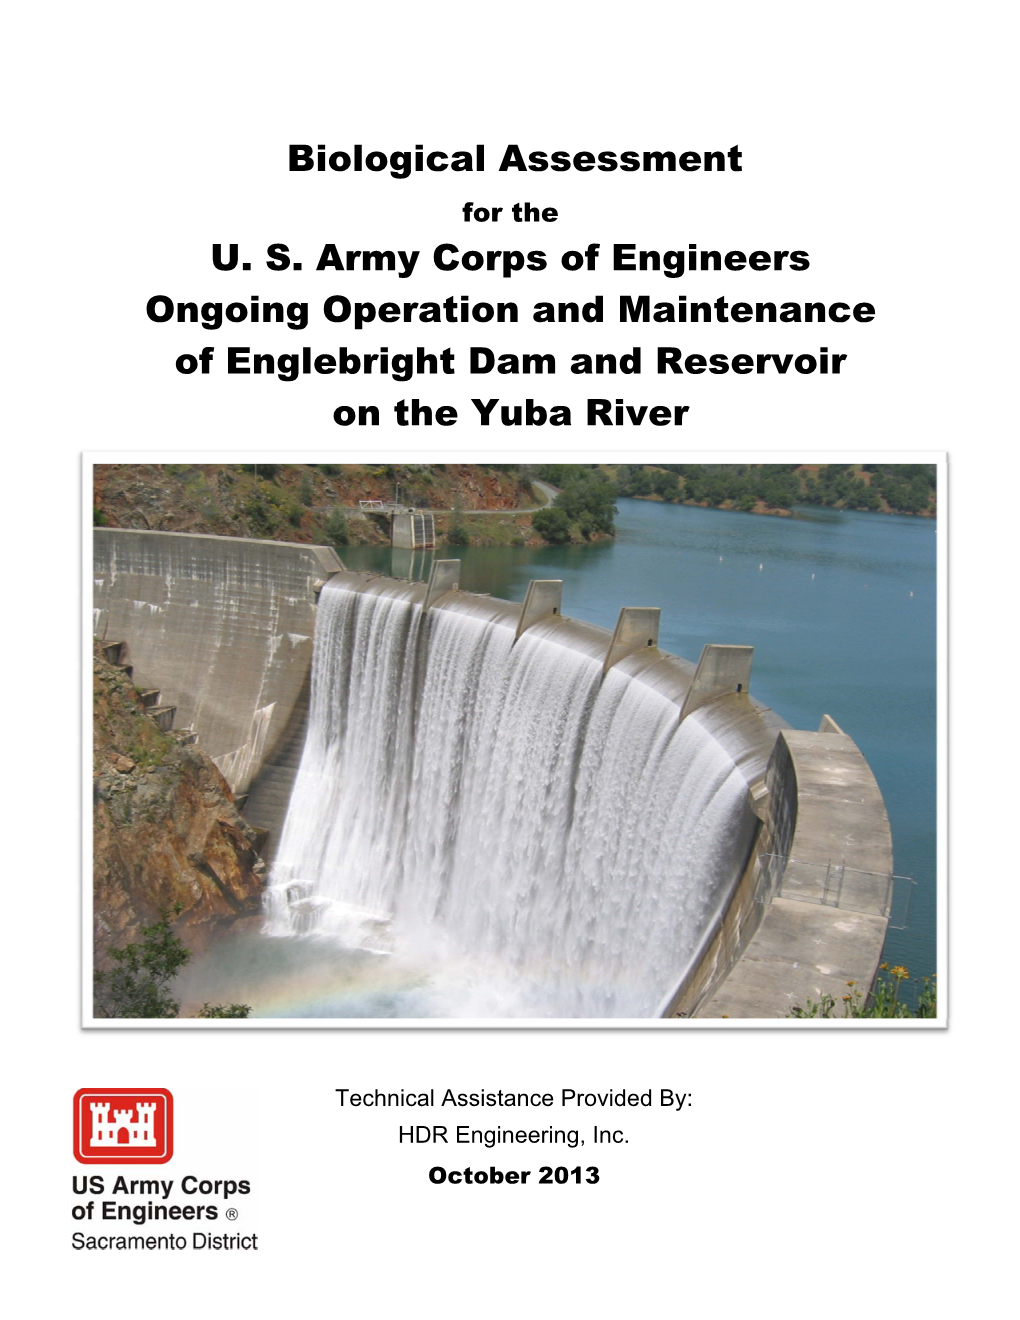 Biological Assessment for the U.S. Army Corps of Engineers Ongoing Operation and Maintenance of Englebright Dam and Reservoir on the Yuba River